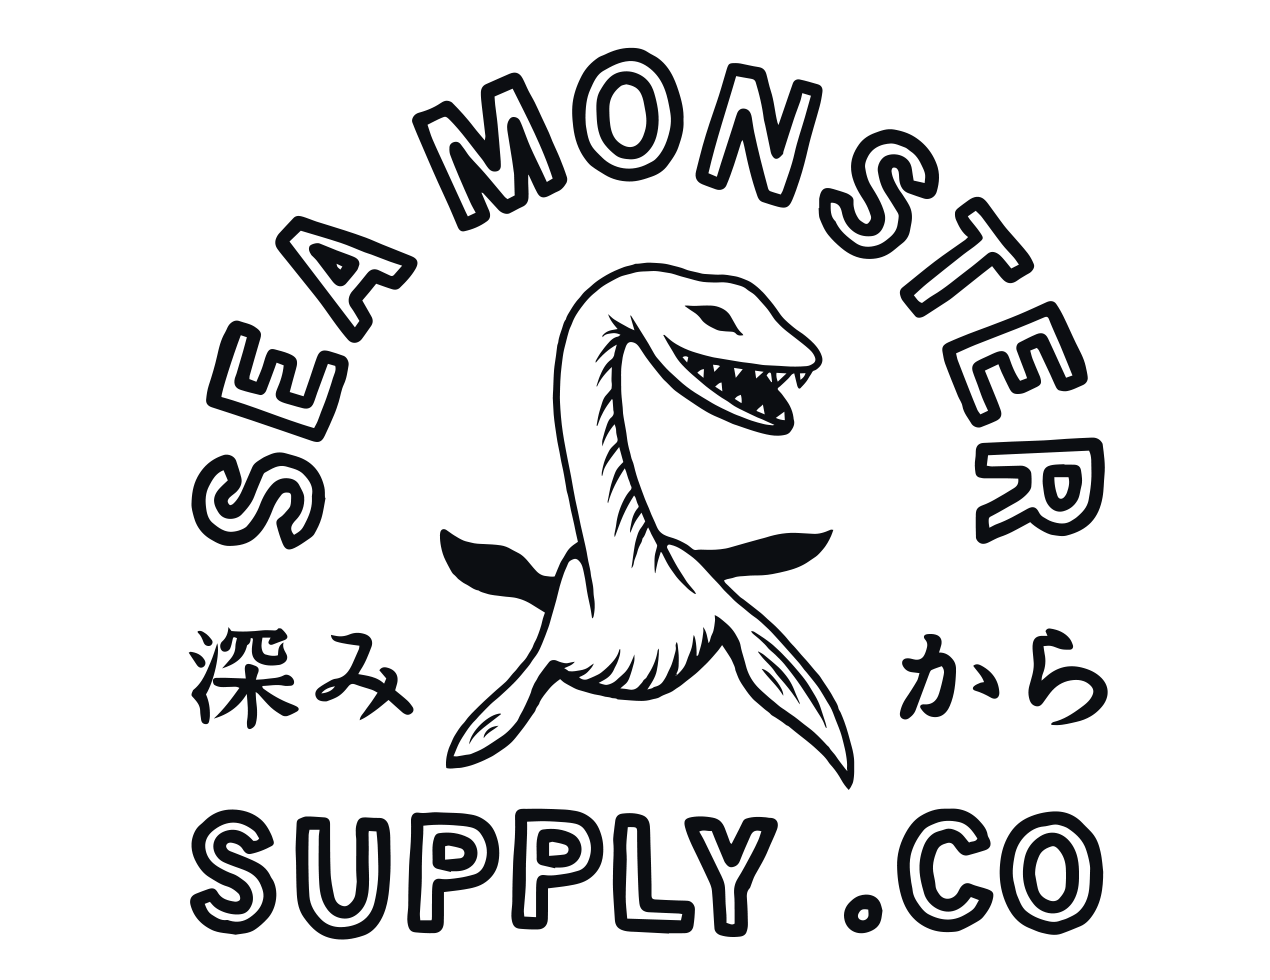 Sea Monster Supply Co